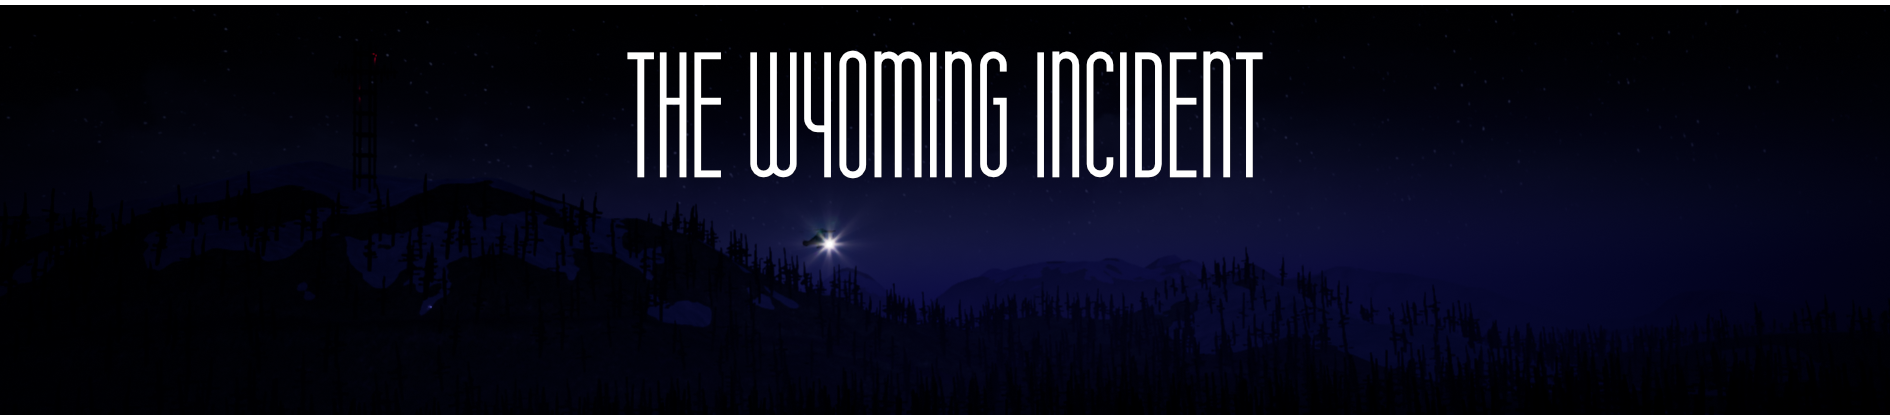 The Wyoming Incident